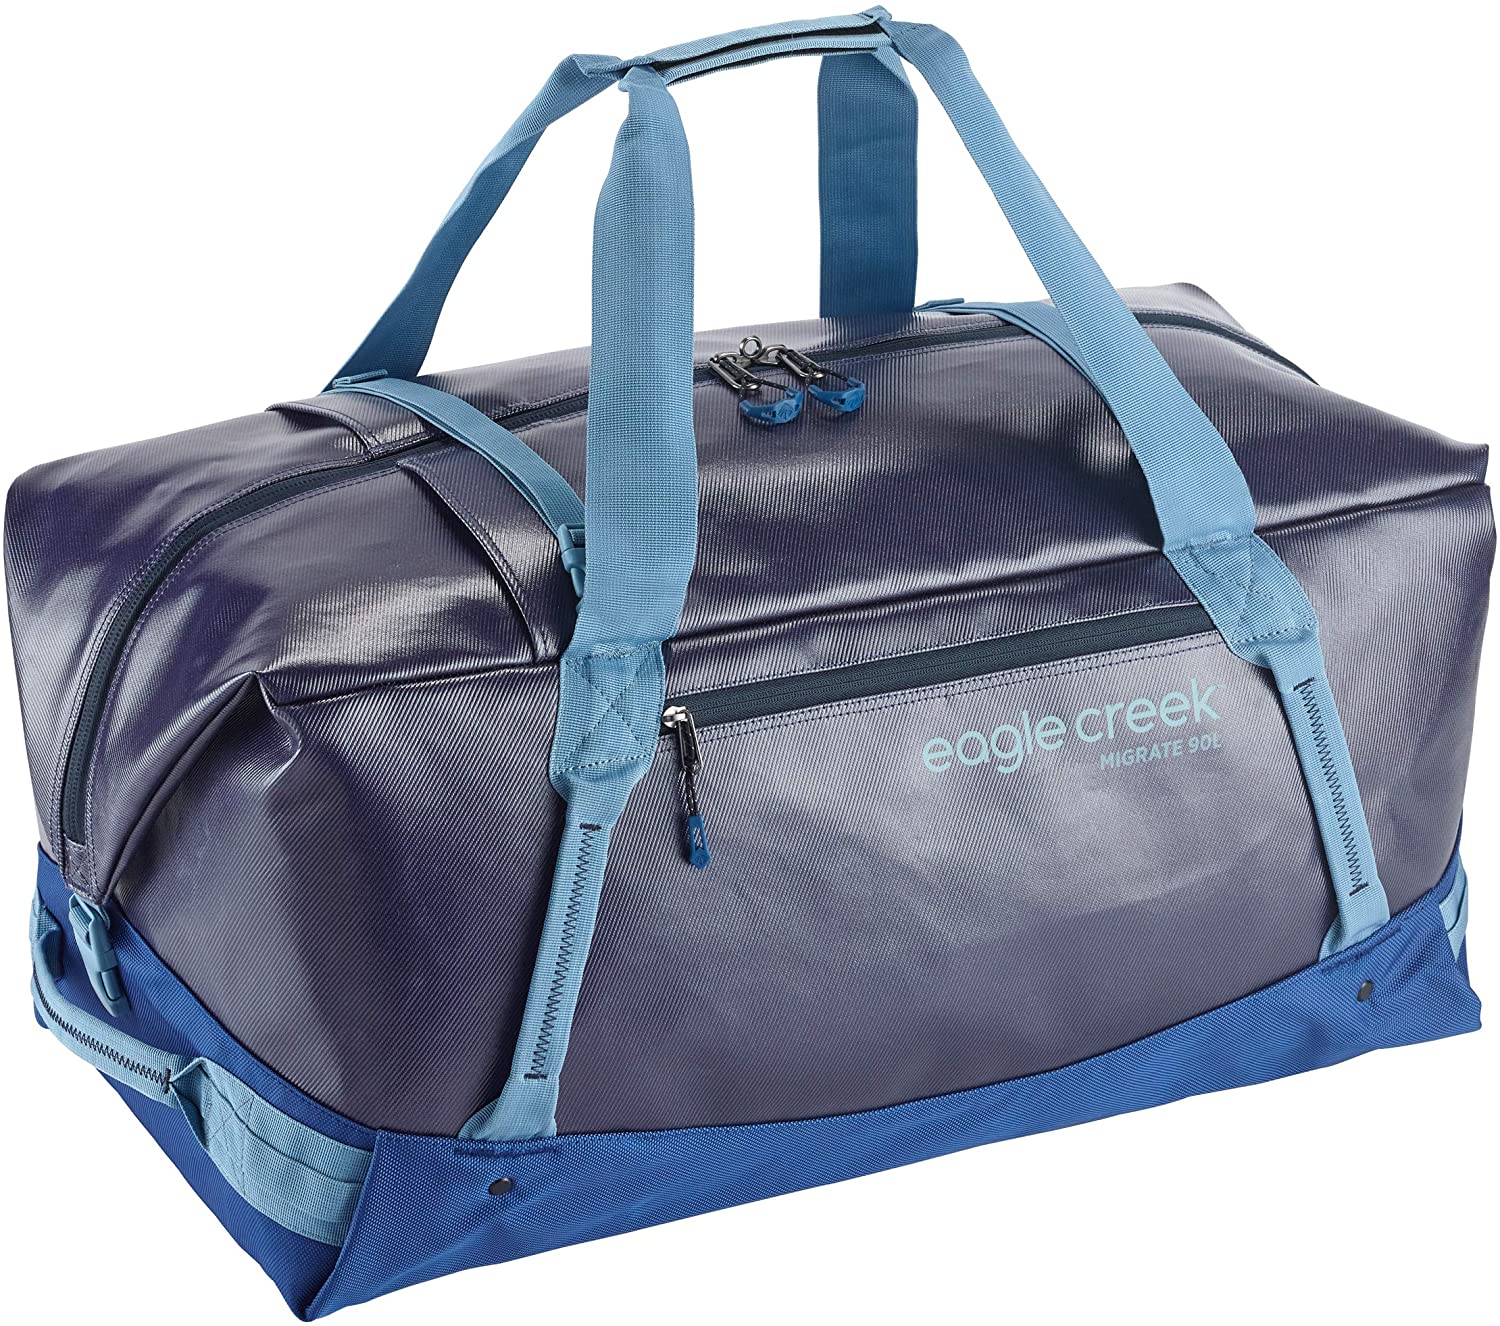 Eagle Creek Migrate Duffel 90 Liters in Arctic Blue color from the front